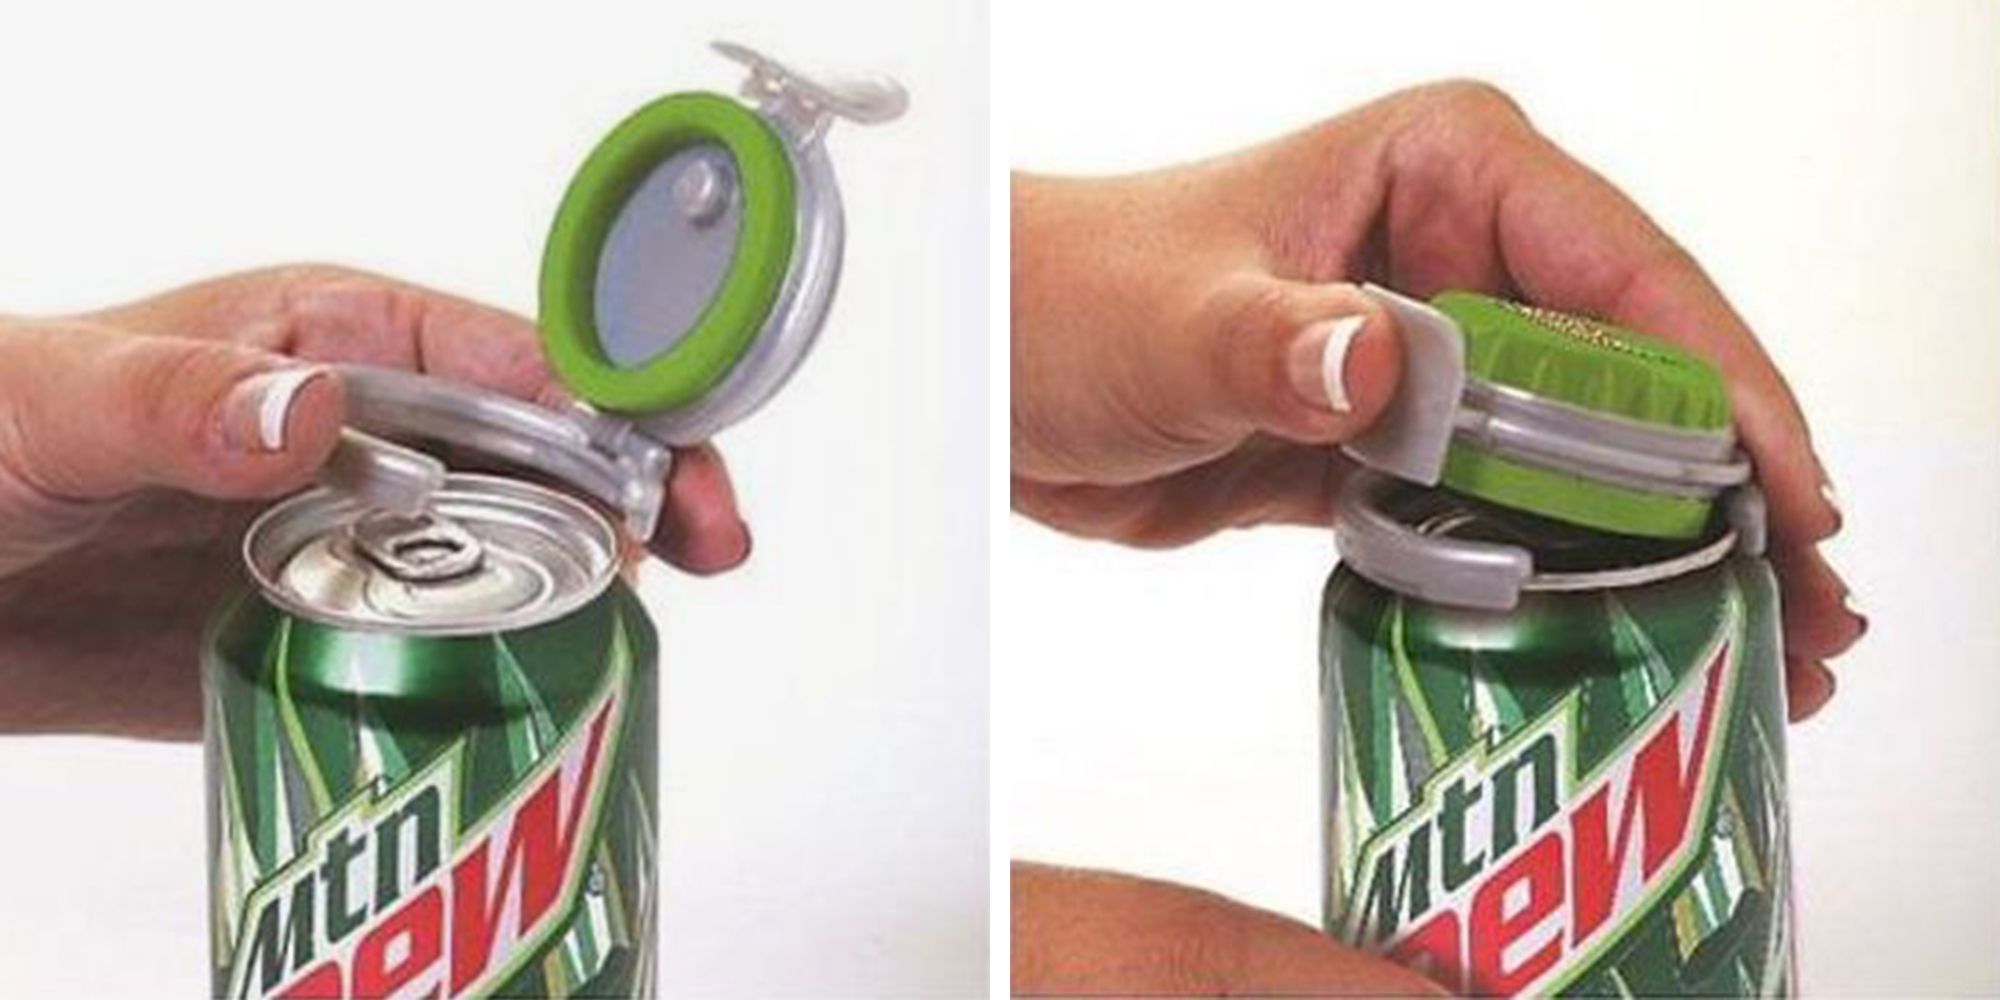 You Can Get a Mountain Dew Can Pump That Will Keep Your Soda Fizzy